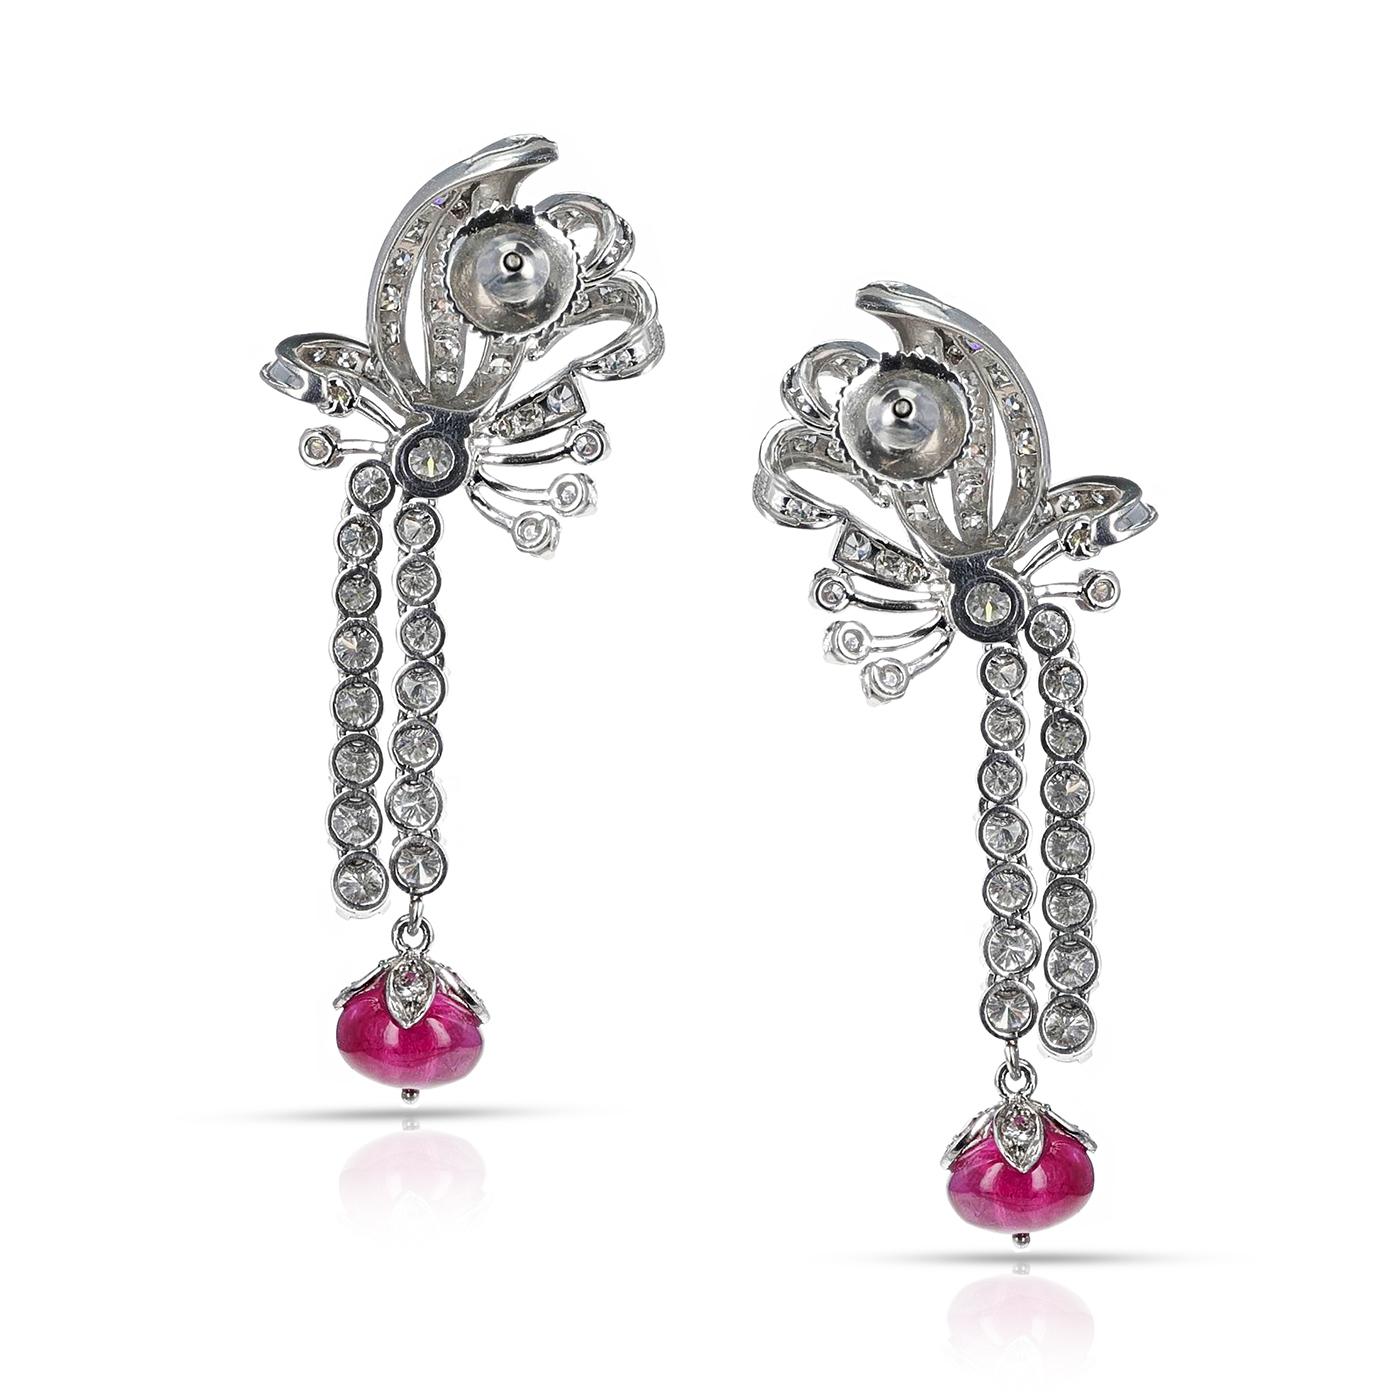 An Art Deco and Platinum Diamond Cocktail Earrings with Rubies. The weight of the diamonds is 4.50 carats and the weight of the rubies is 7 carats. The length of the earrings is 2 inches. The total weight of the earrings is 15.75 grams. 